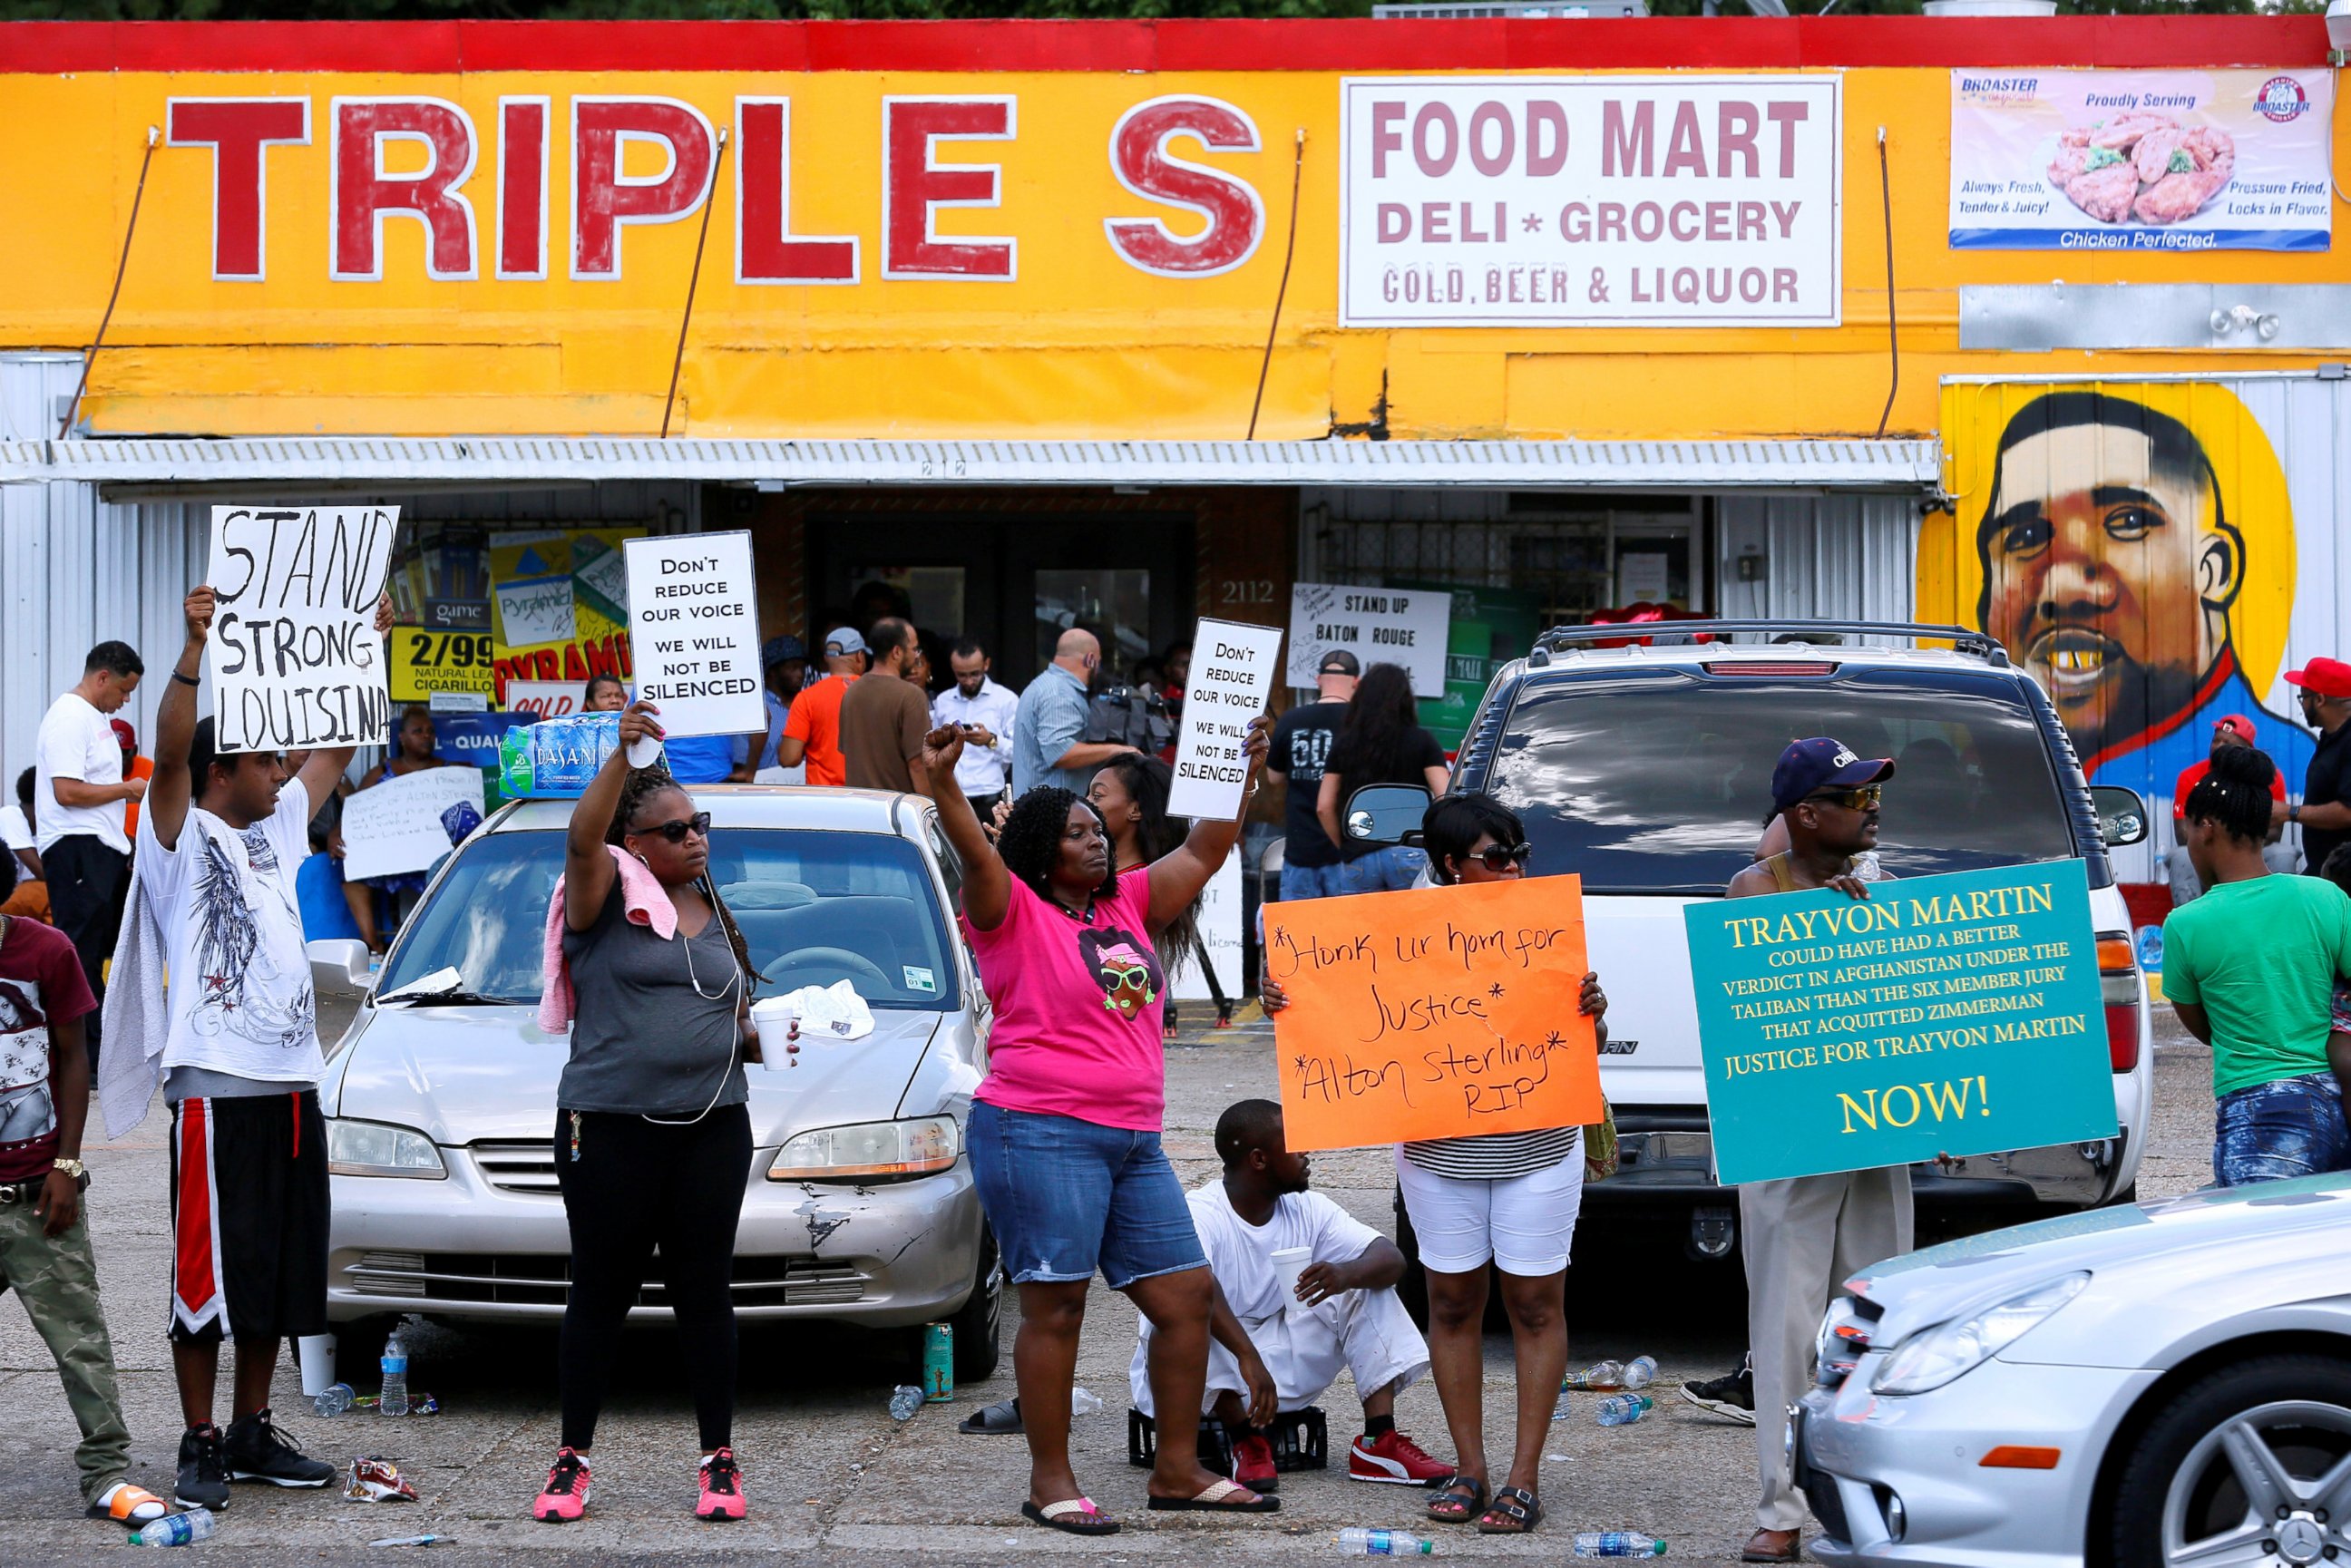 PHOTO: Protesters demonstrate outside the Triple S Food Mart where Alton Sterling was shot dead by police in Baton Rouge, Louisiana, July 7, 2016.